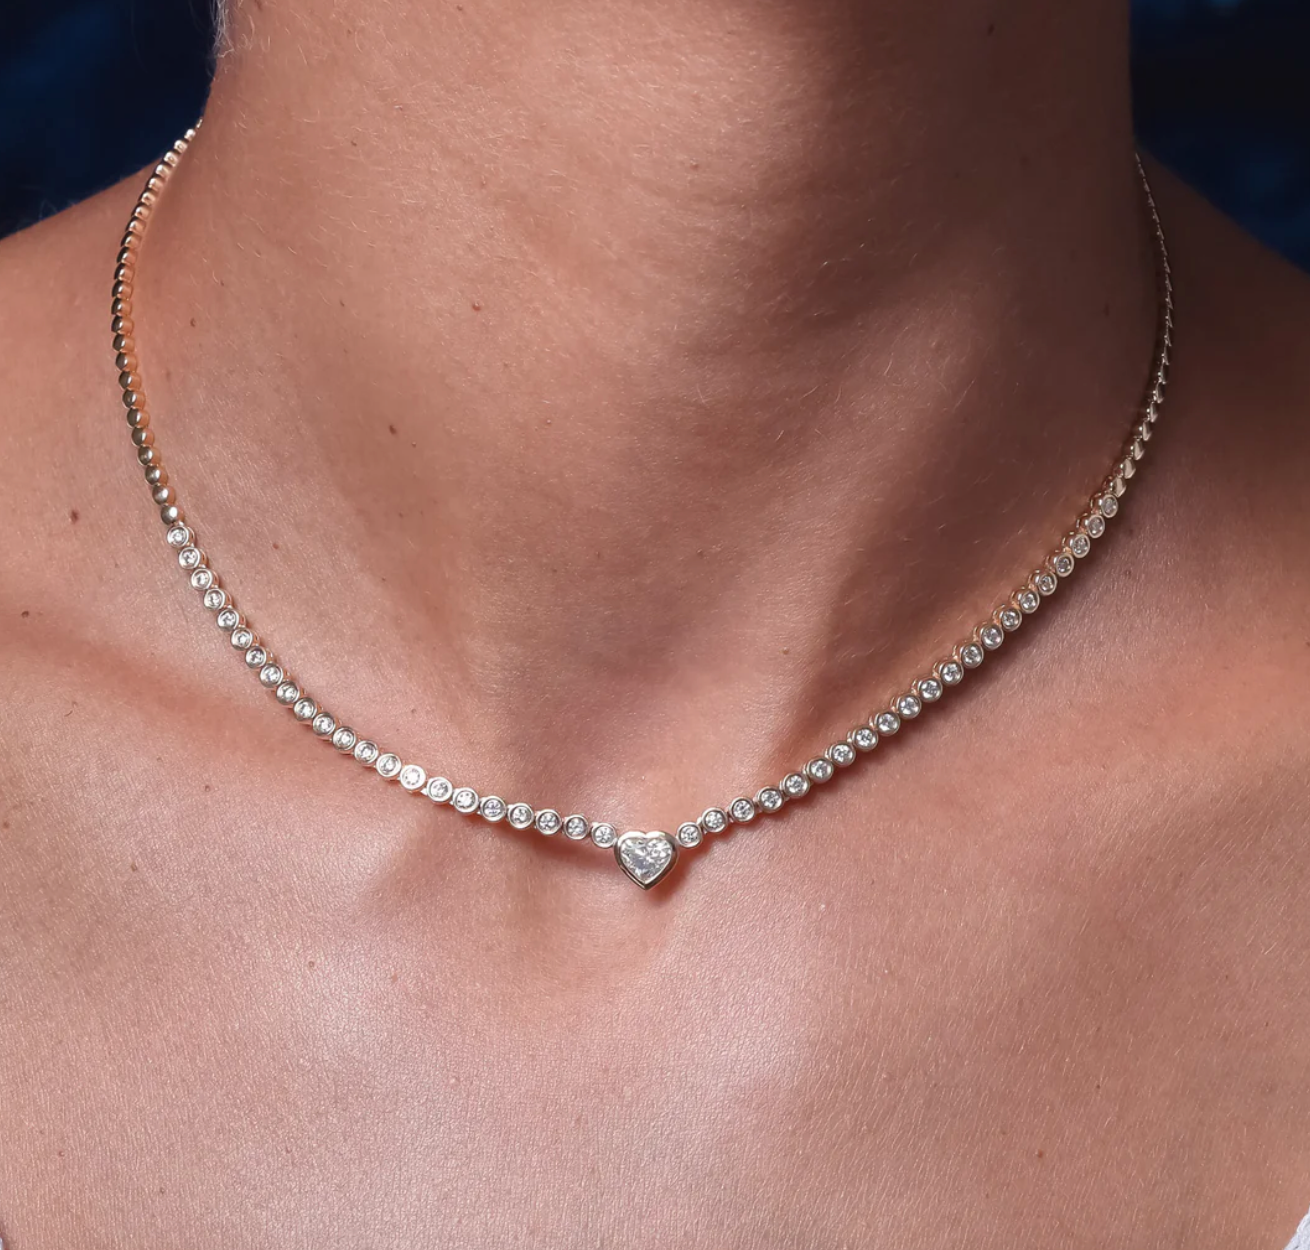 Ladies Statement Jewellery - Platinum plated tennis necklace €100 off  reduced to €55 https://ladiesstatementjewellery.com/product/tennis-necklace- heart-shaped/ #ladiesstatementjewellery #Waterford @followers #wedding  #valentines #weddings ...